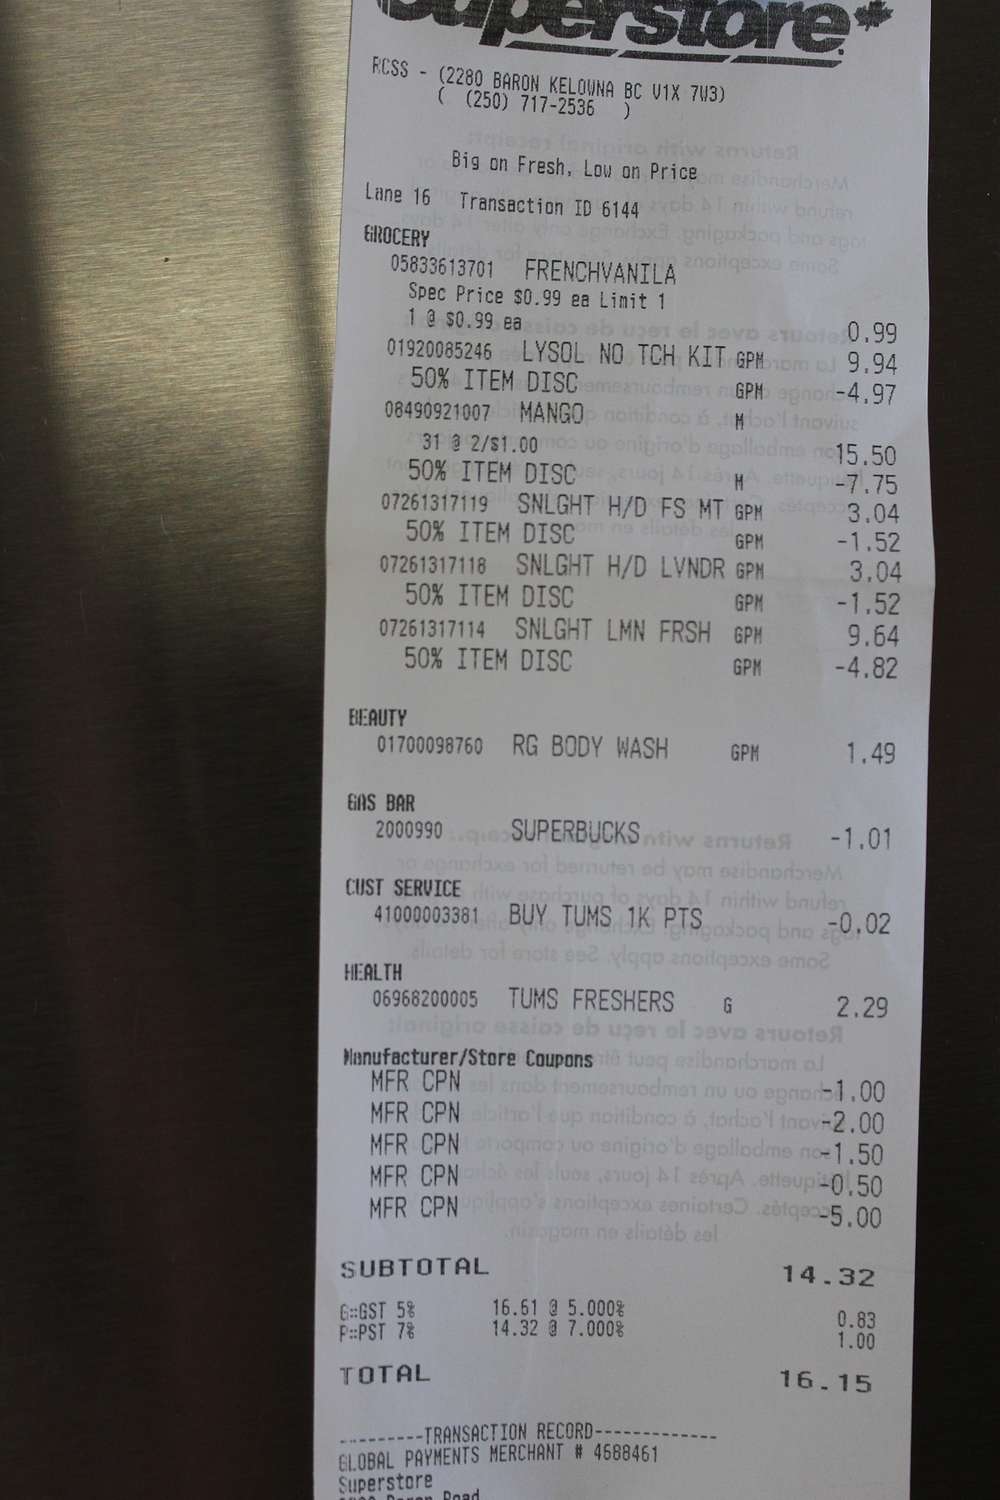 members/savingyourhardearnedmoney-albums-superstore-brag-picture174698-jackpot-clearance-superstore-sunlight-dish-washing-liquid-were-1-52-1-2l-sunlight-dishwasher-tabs-were-4-82-i-had-2-off-coupon-plus-i-am-doing-mir-shoppers-voice-so-i-paid-2-61-buy-lysol-no-touch-4-97-i-had-5-off-coupon-so-57-dr-oetker-pudding-99-50-coupon-49-sliced-mangoes-were-25-can-tums-were-2-29-less-1-coupon-plus-1000-pc-points-right-guard-1-49-less-1-50-insert-coupon-so-grand-total-after-mir-tums-points-9-15.jpg